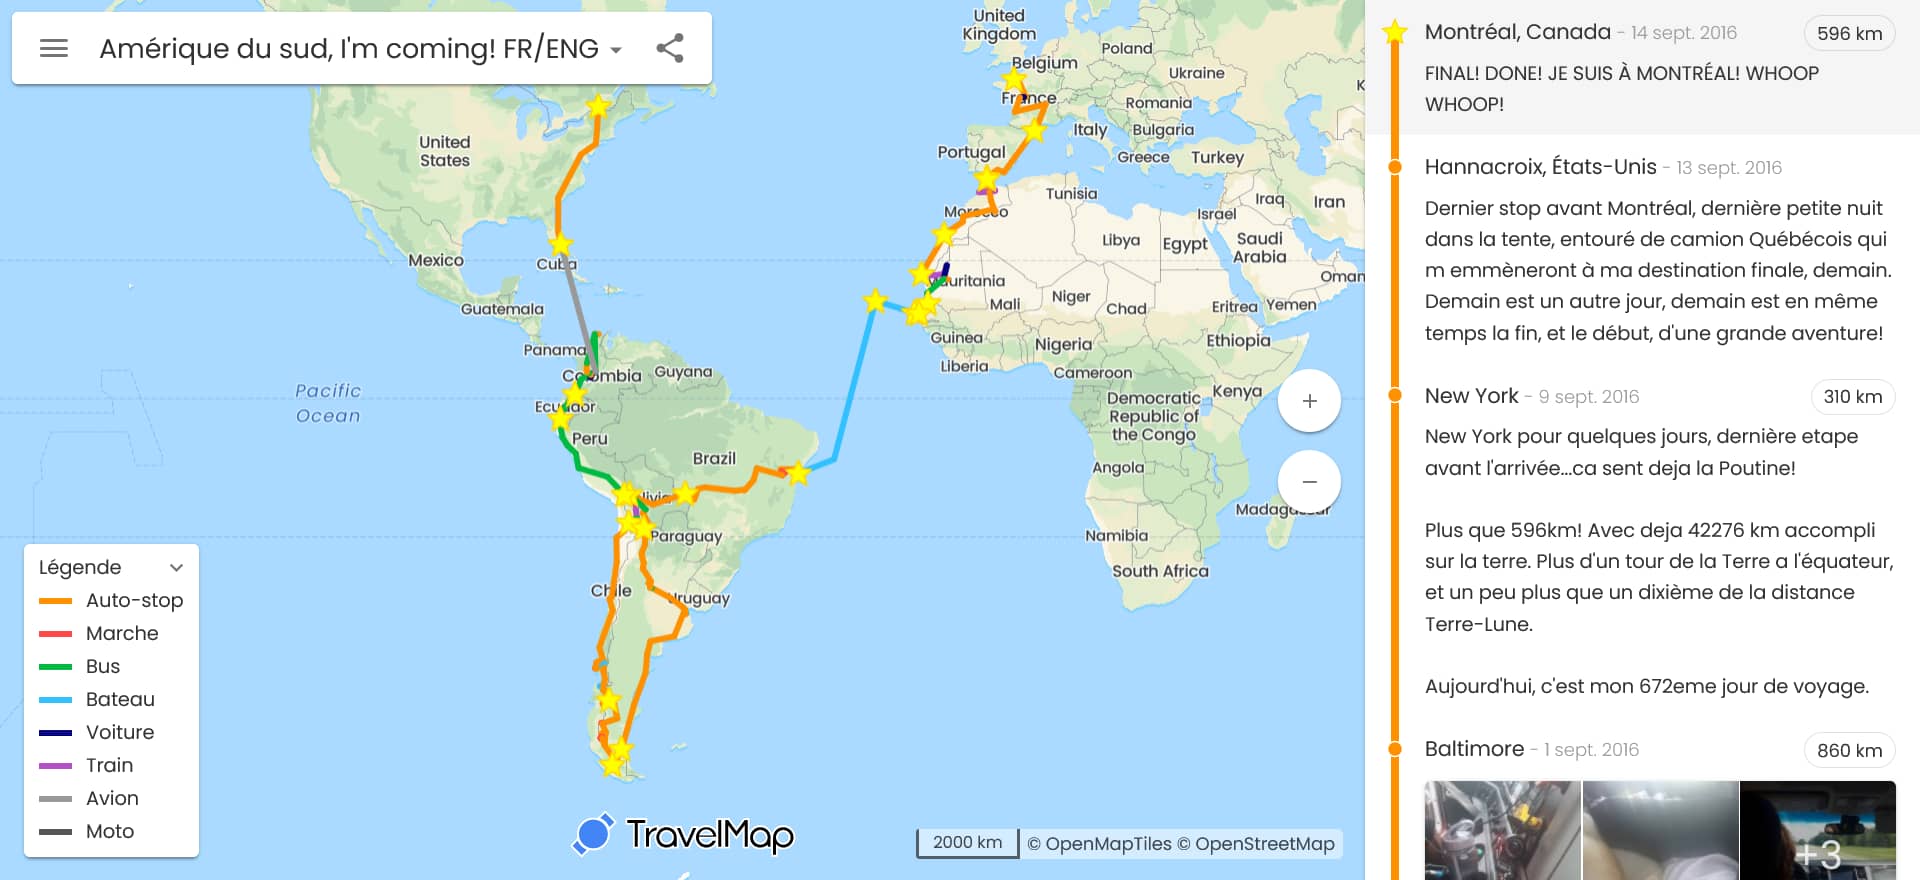 Hitchhiking across continents and ocean